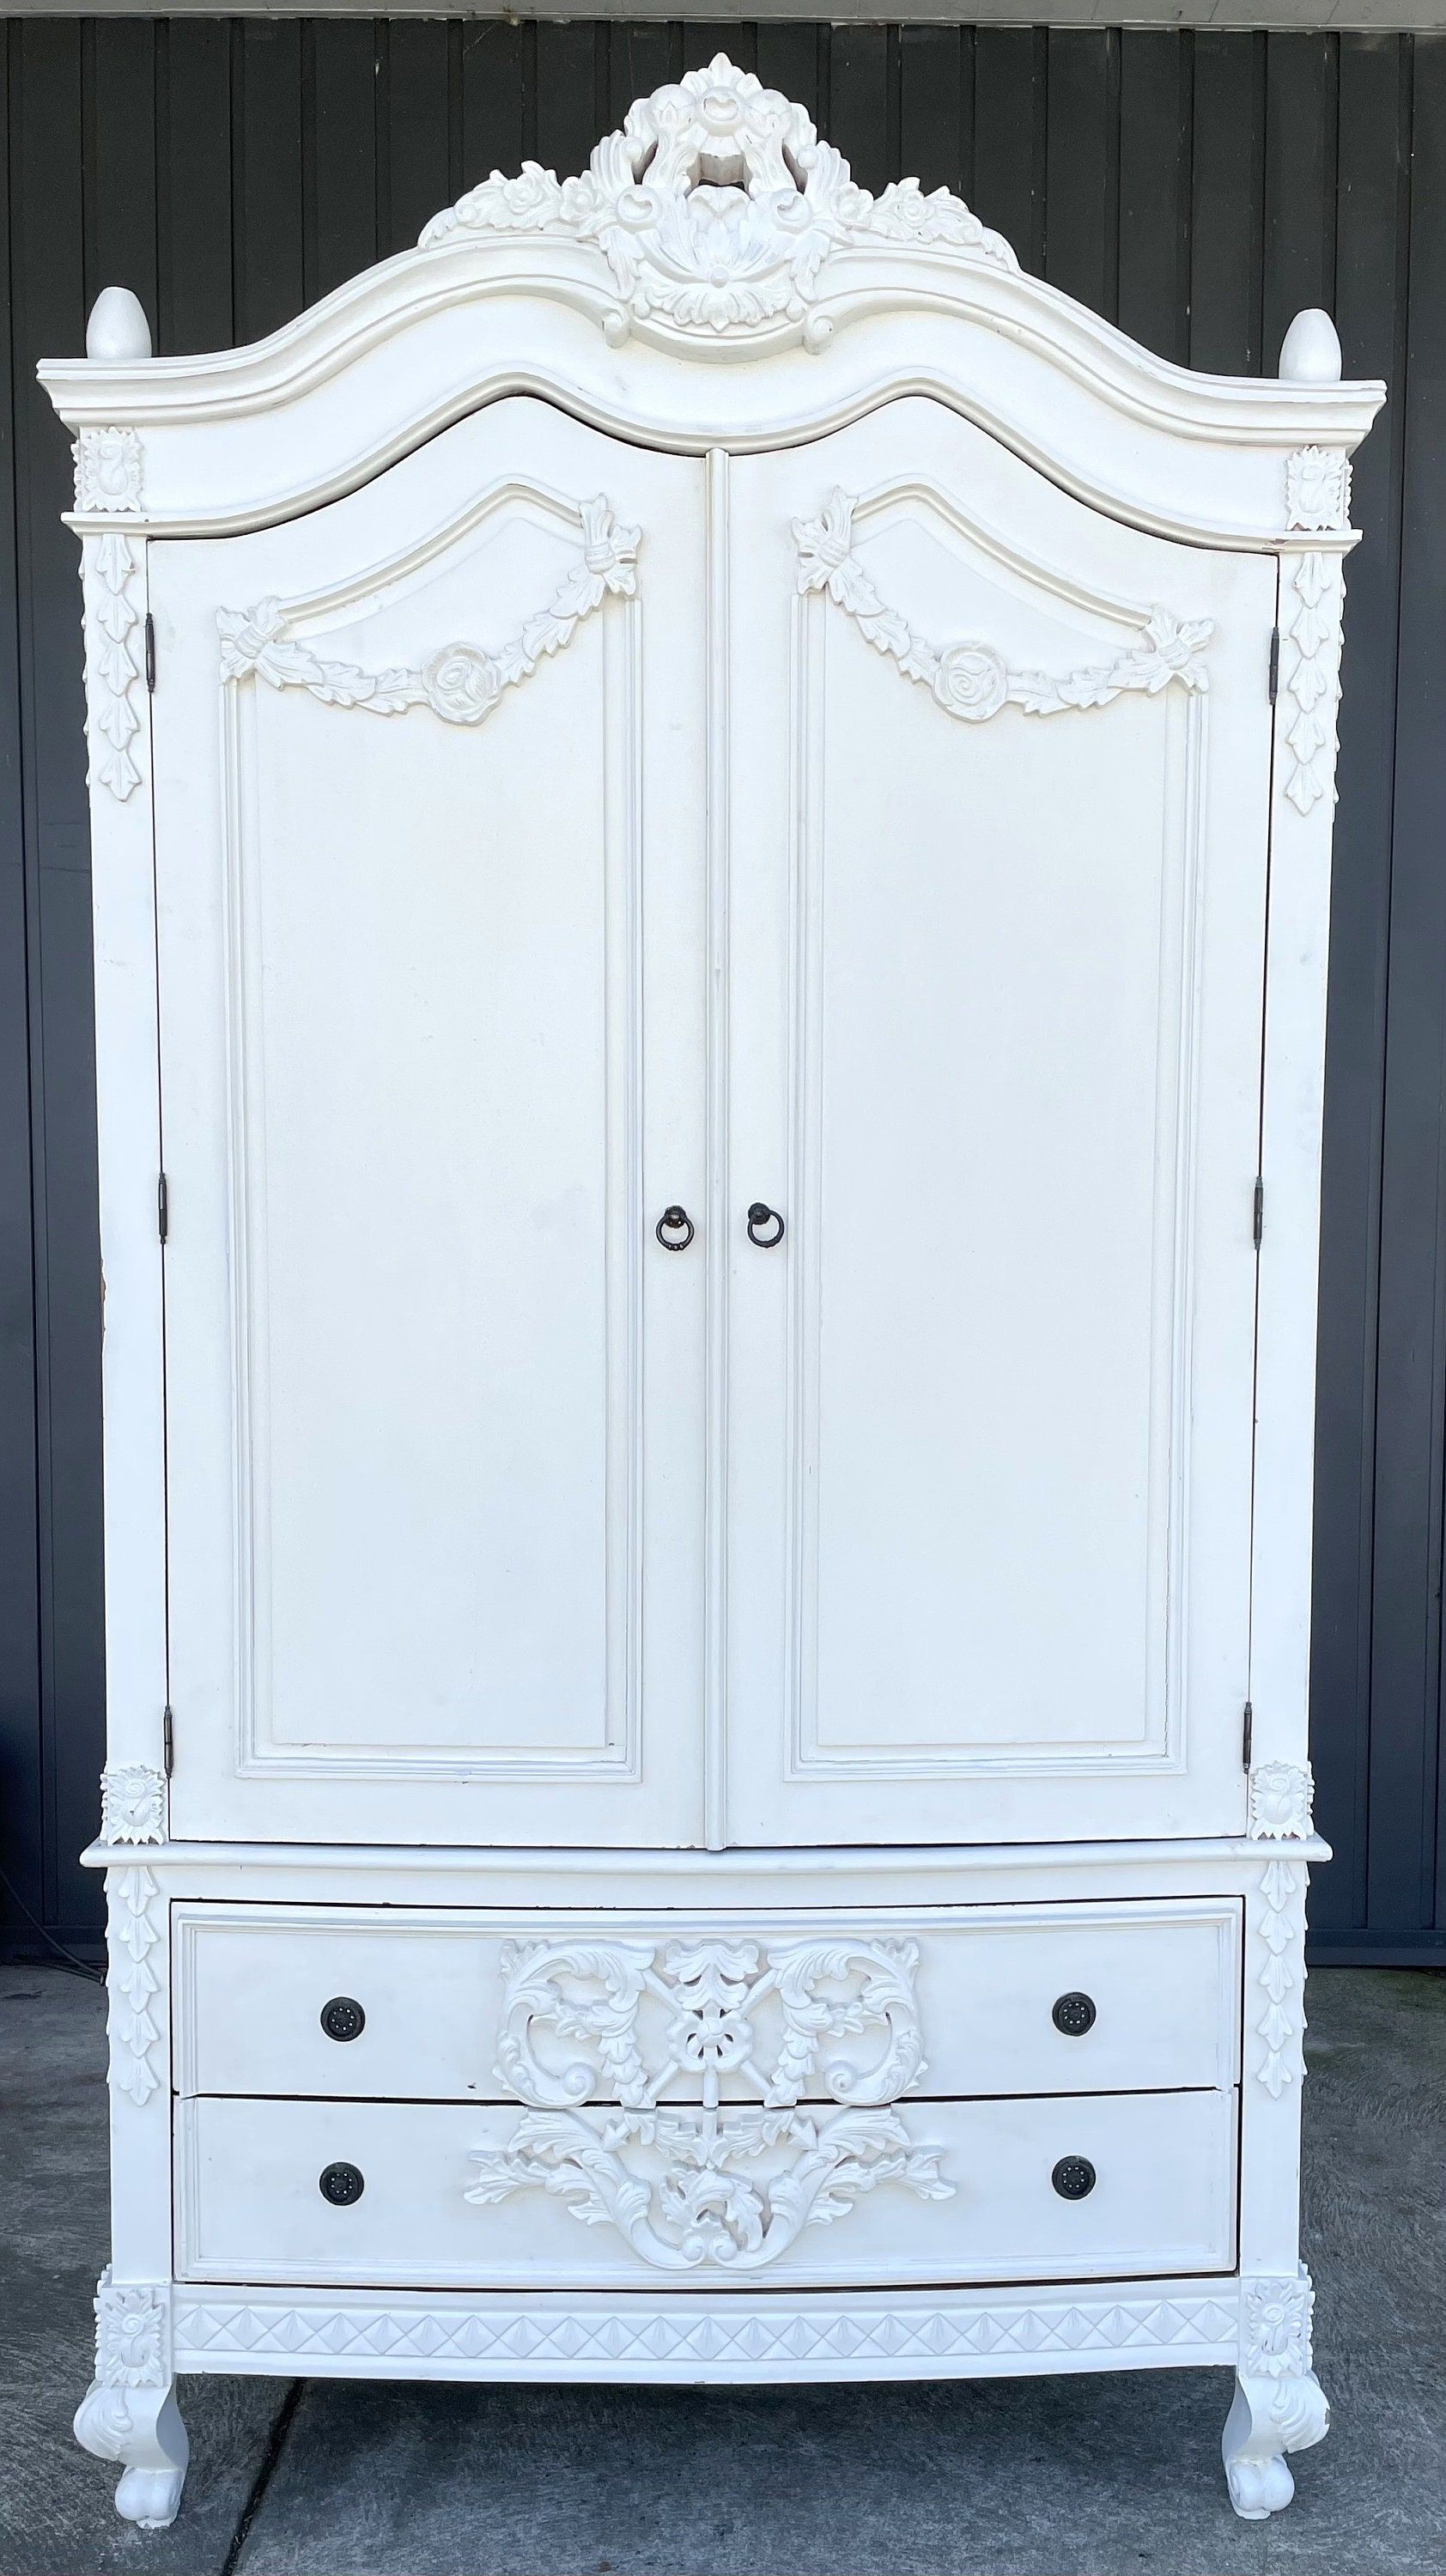 Shabby Chic Distressed White Vintage Style French Baroque – Etsy With Regard To French Shabby Chic Wardrobes (View 10 of 15)